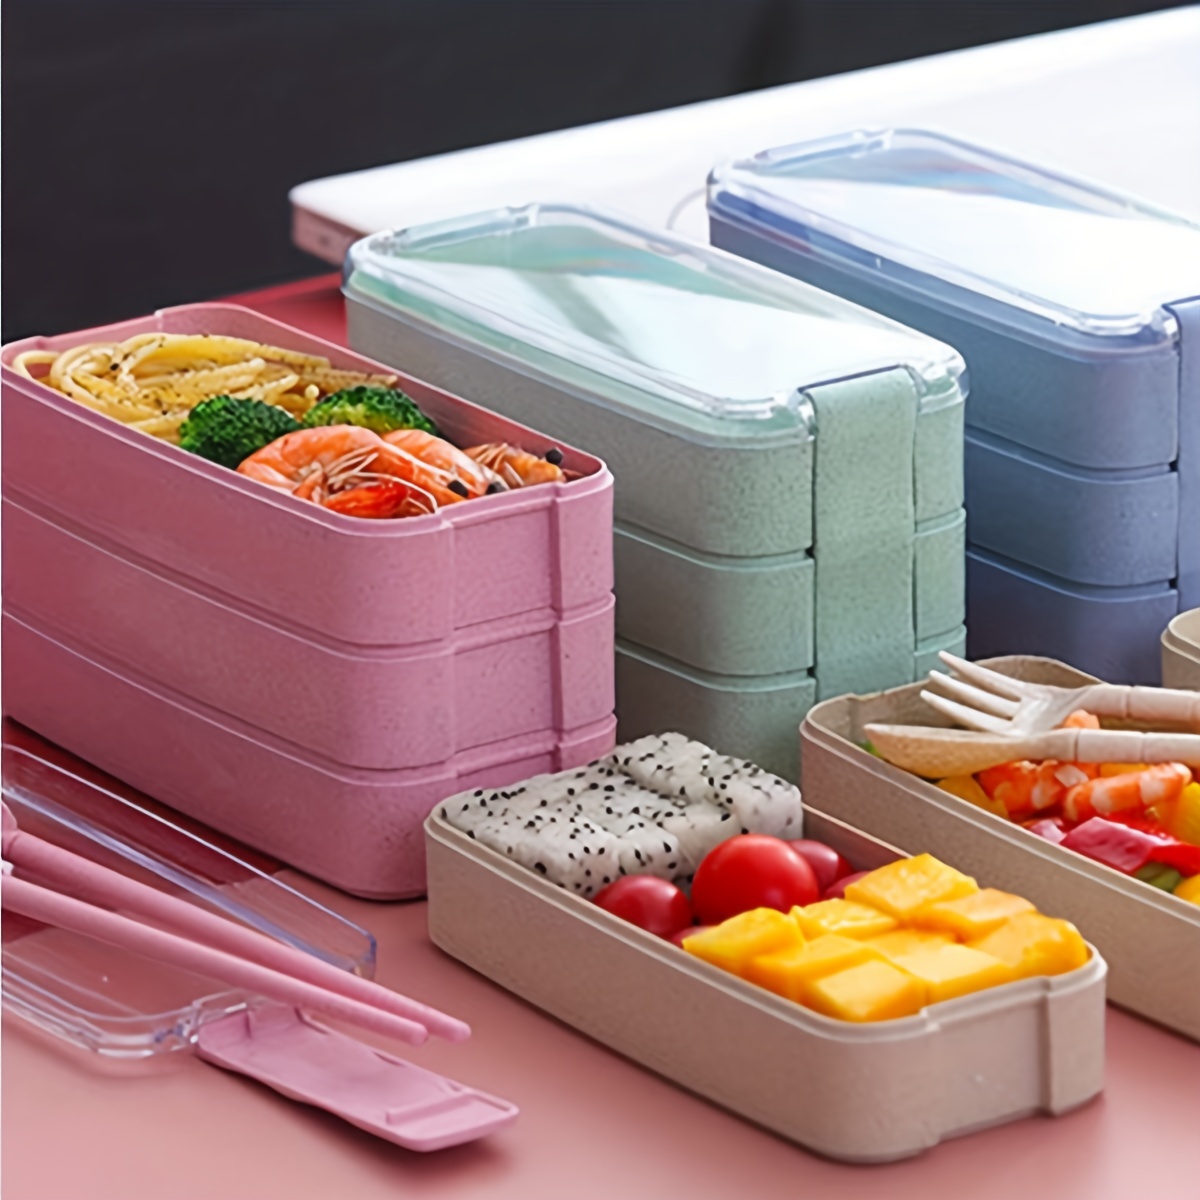 1pc Plastic Divided Lunch Box/Bento Container/Meal Prep Box/Food Storage Box  - Includes Chopsticks, Spoon, and Utensils